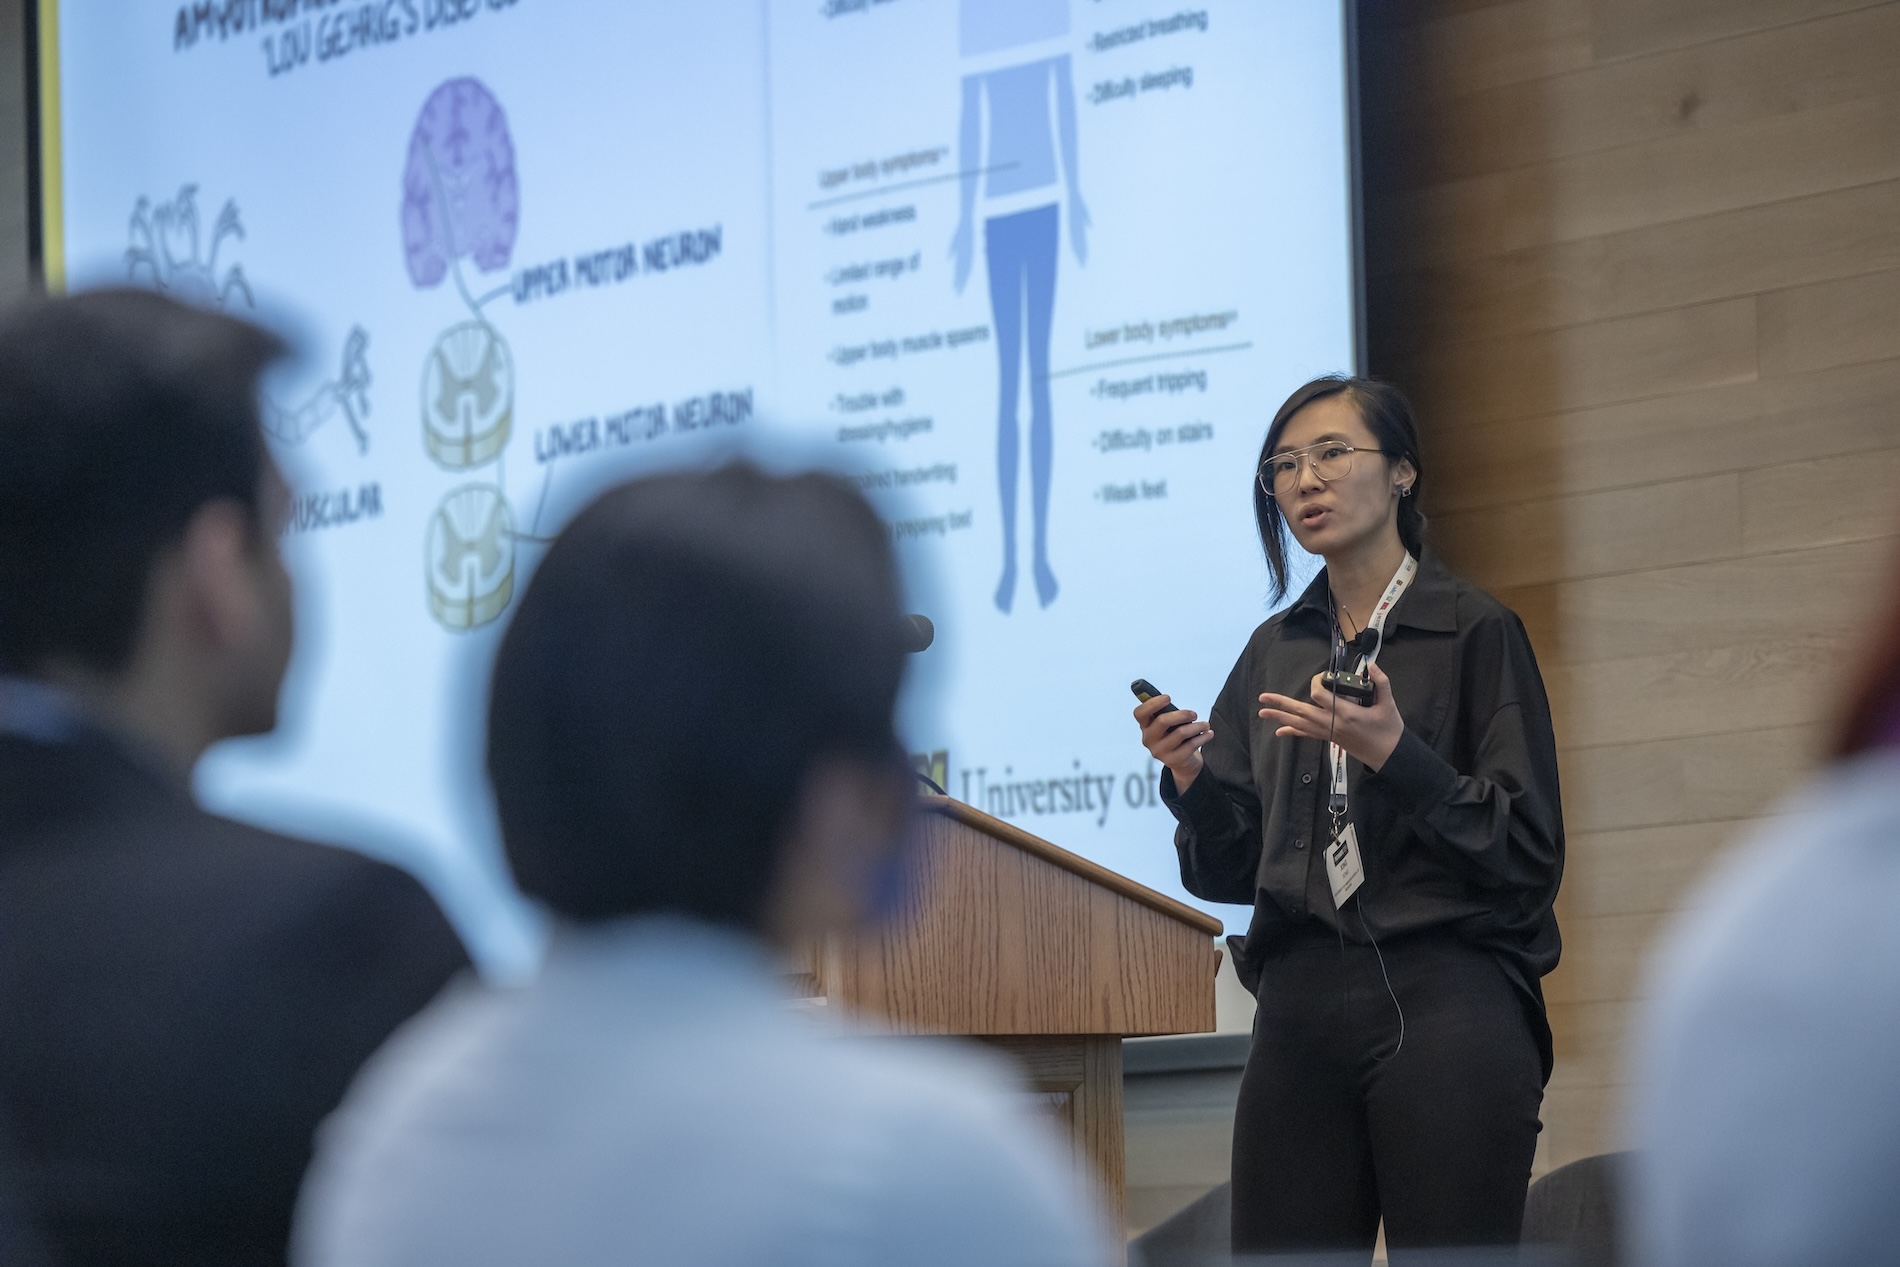 MU School of Medicine Assistant Professor Xing Song delivers her PATHWAYS faculty talk about a better understanding of ALS.